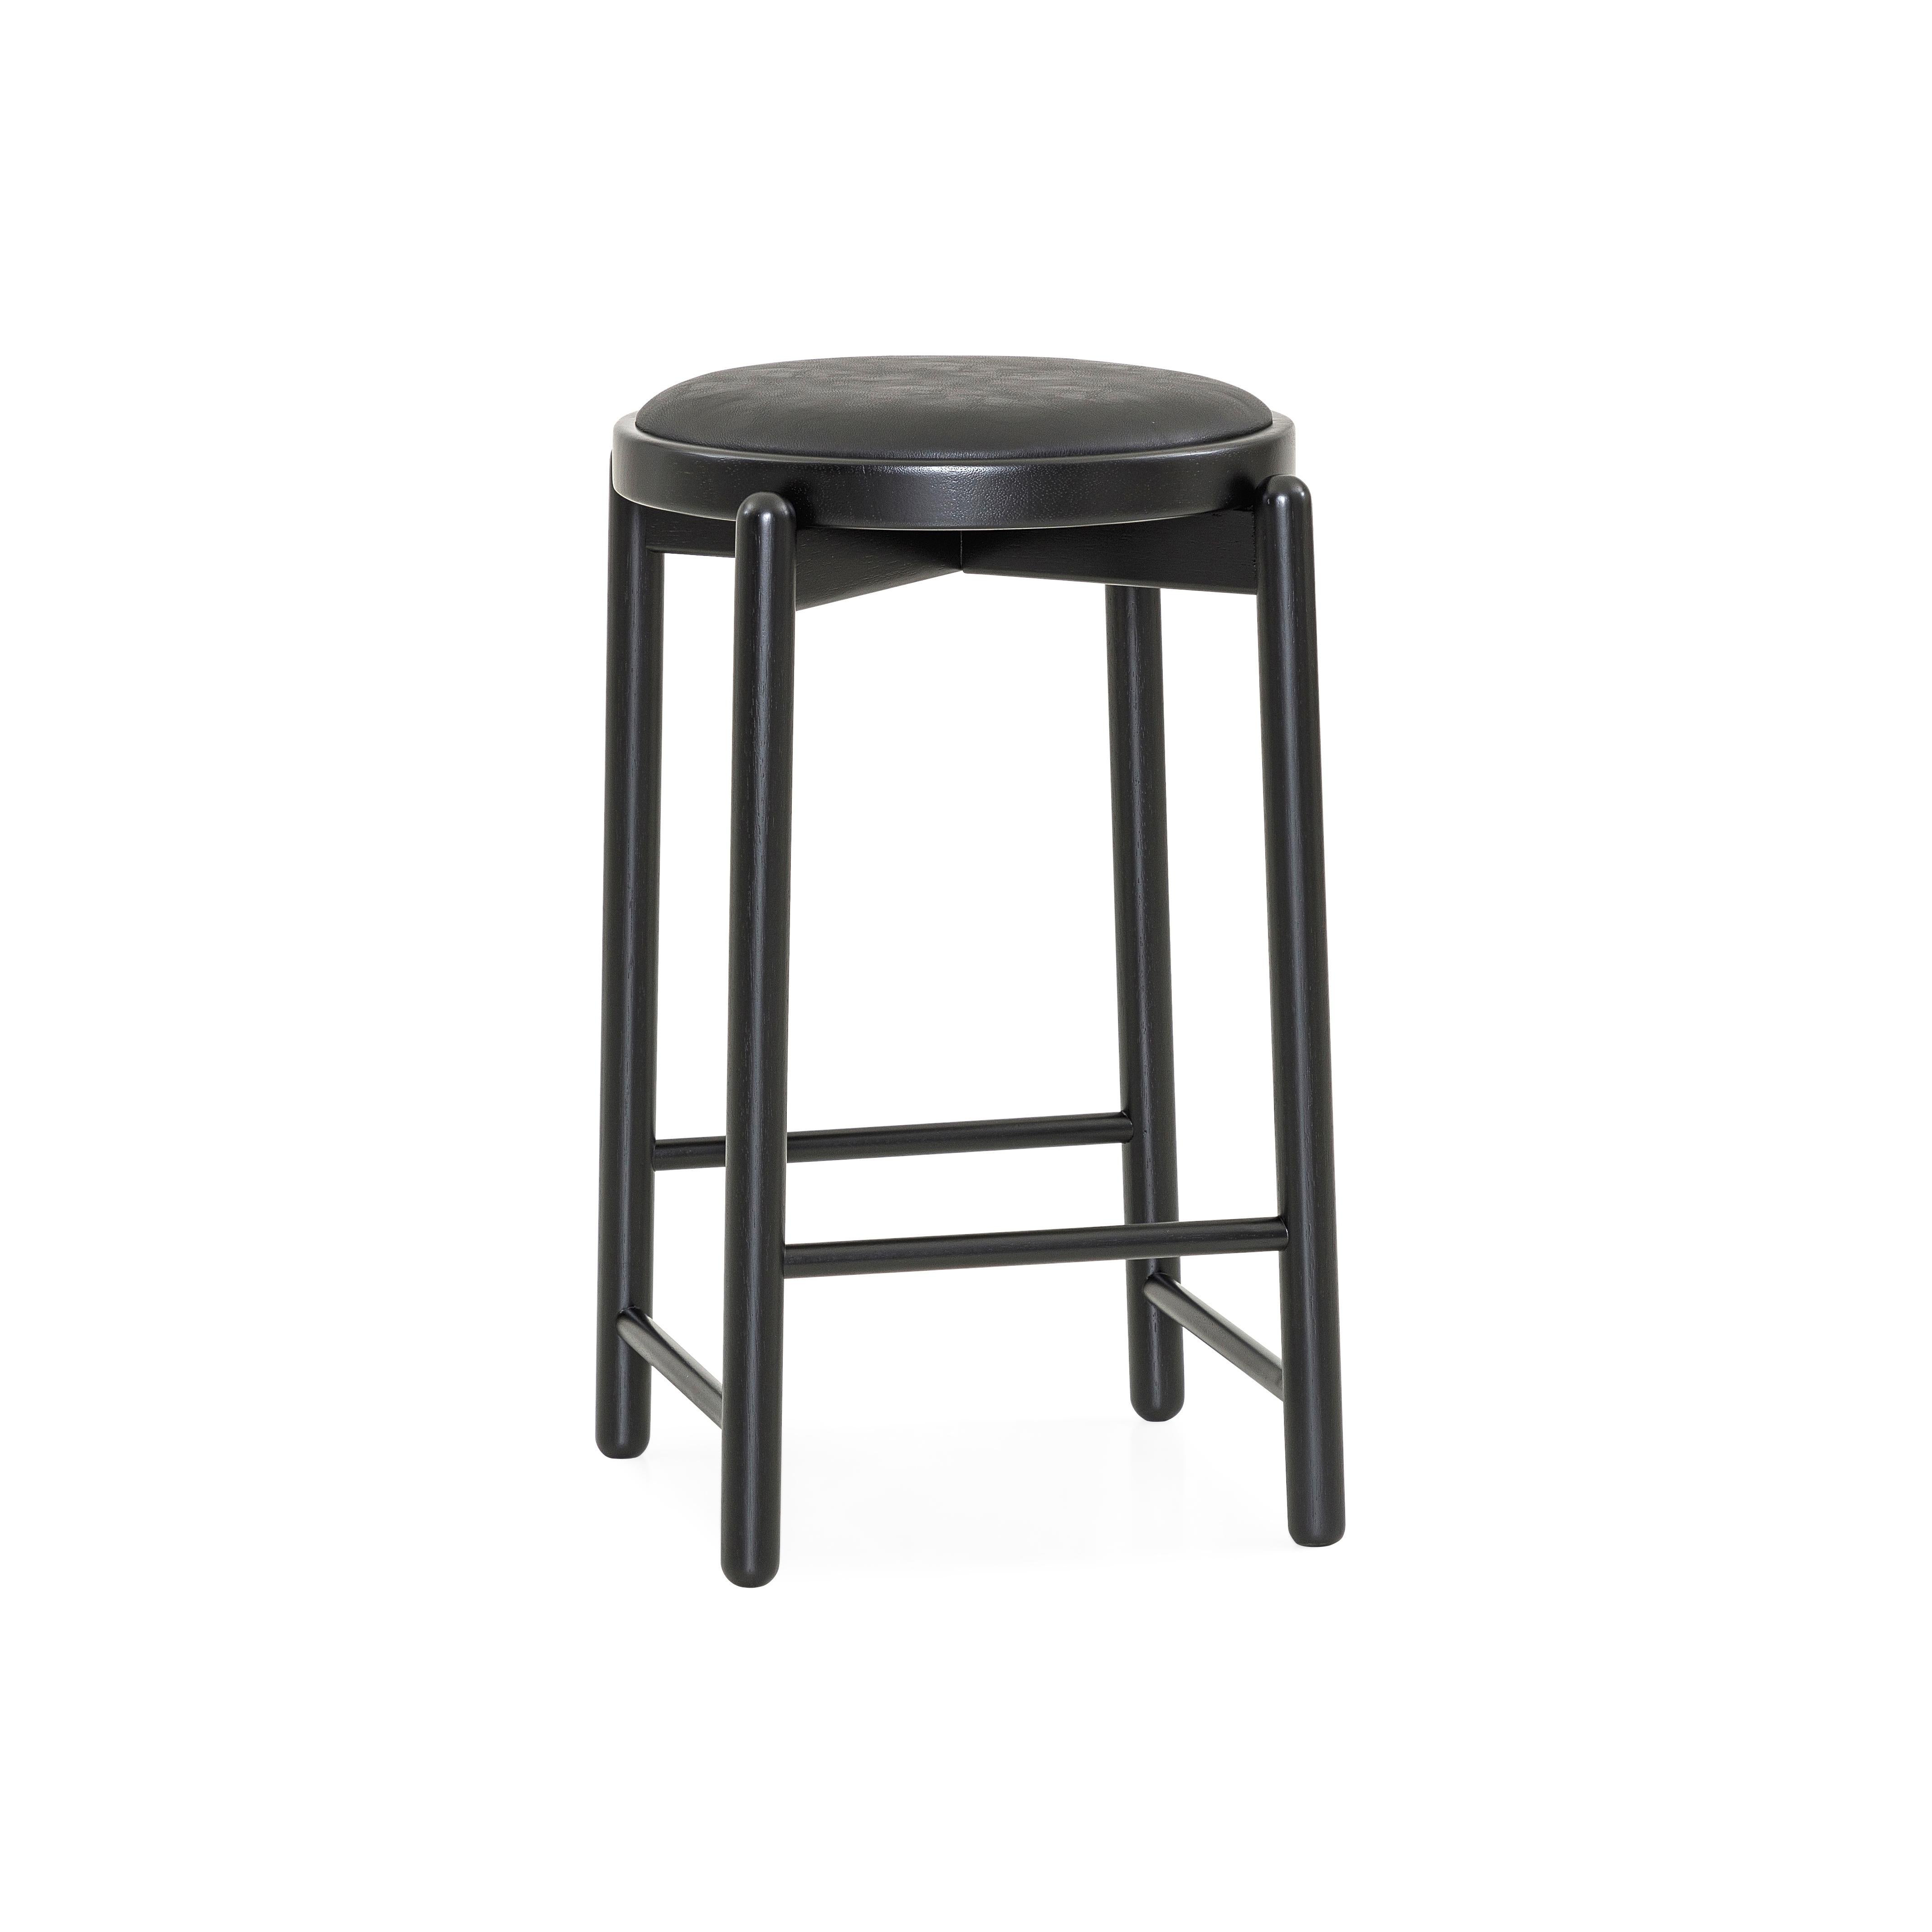 Maru Counter Stool in Black Wood Base and Upholstered Black Seat In New Condition For Sale In Miami, FL